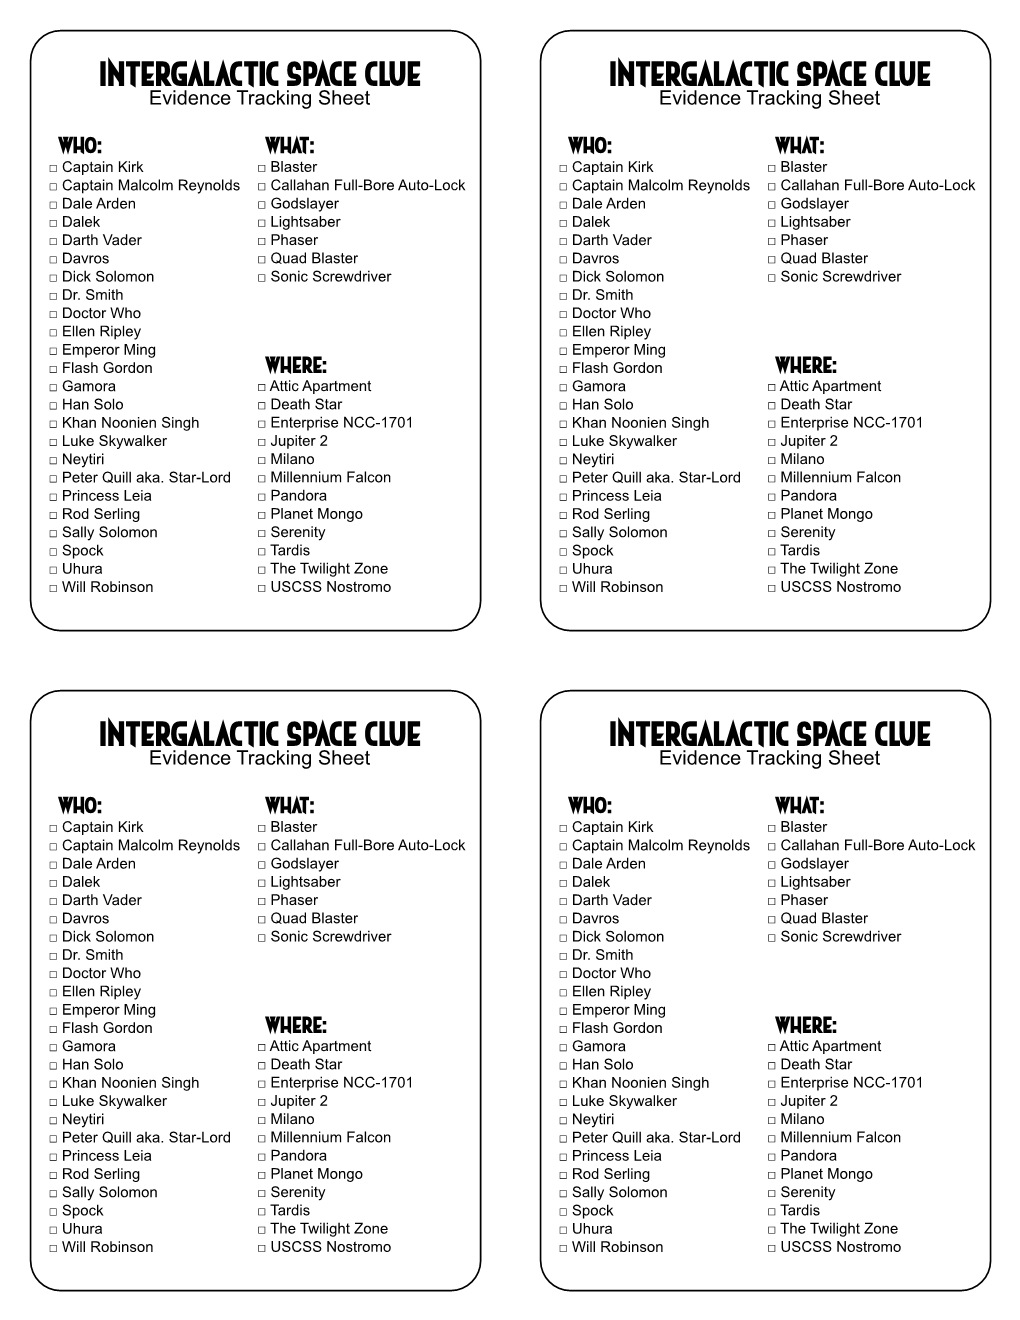 2019 05-10 Clue Evidence Tracking Sheets & Rules for Playing at Home